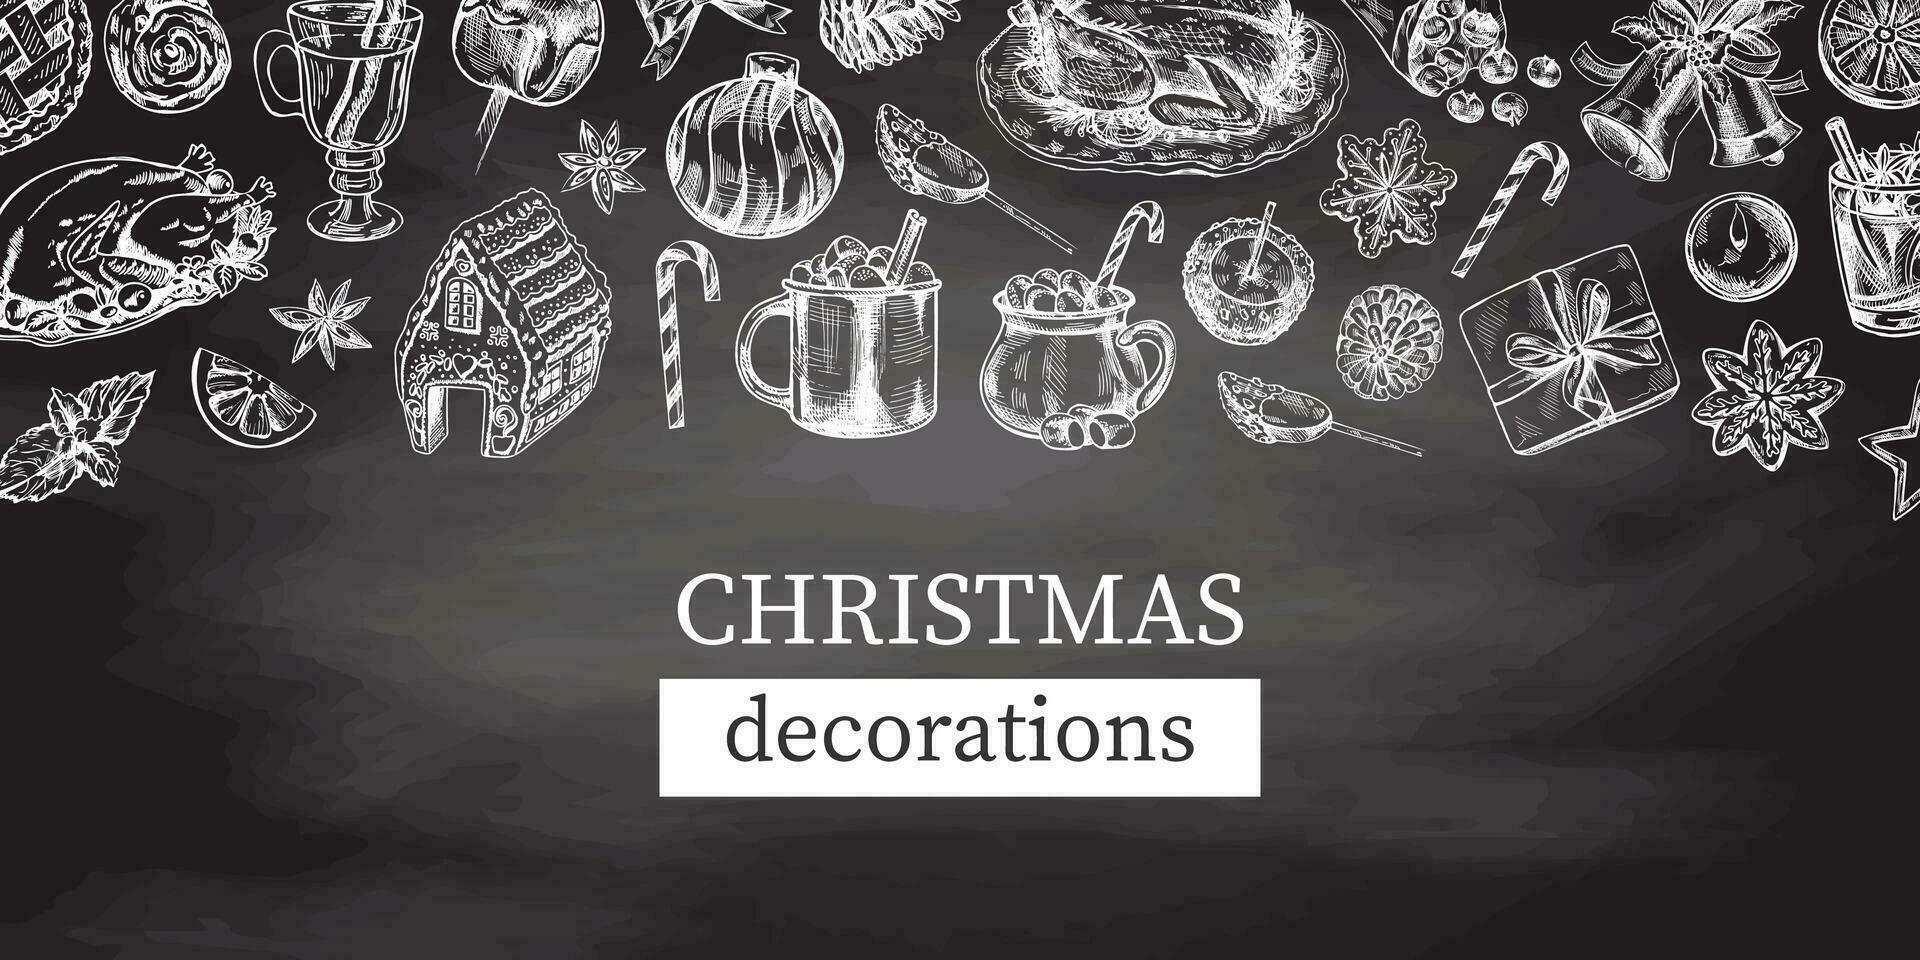 Hand-drawn Christmas template in sketch style. Wreath, gift, sweets, food, Christmas tree decor, drinks and spices on chalkboard background. Vintage design with an empty space. vector